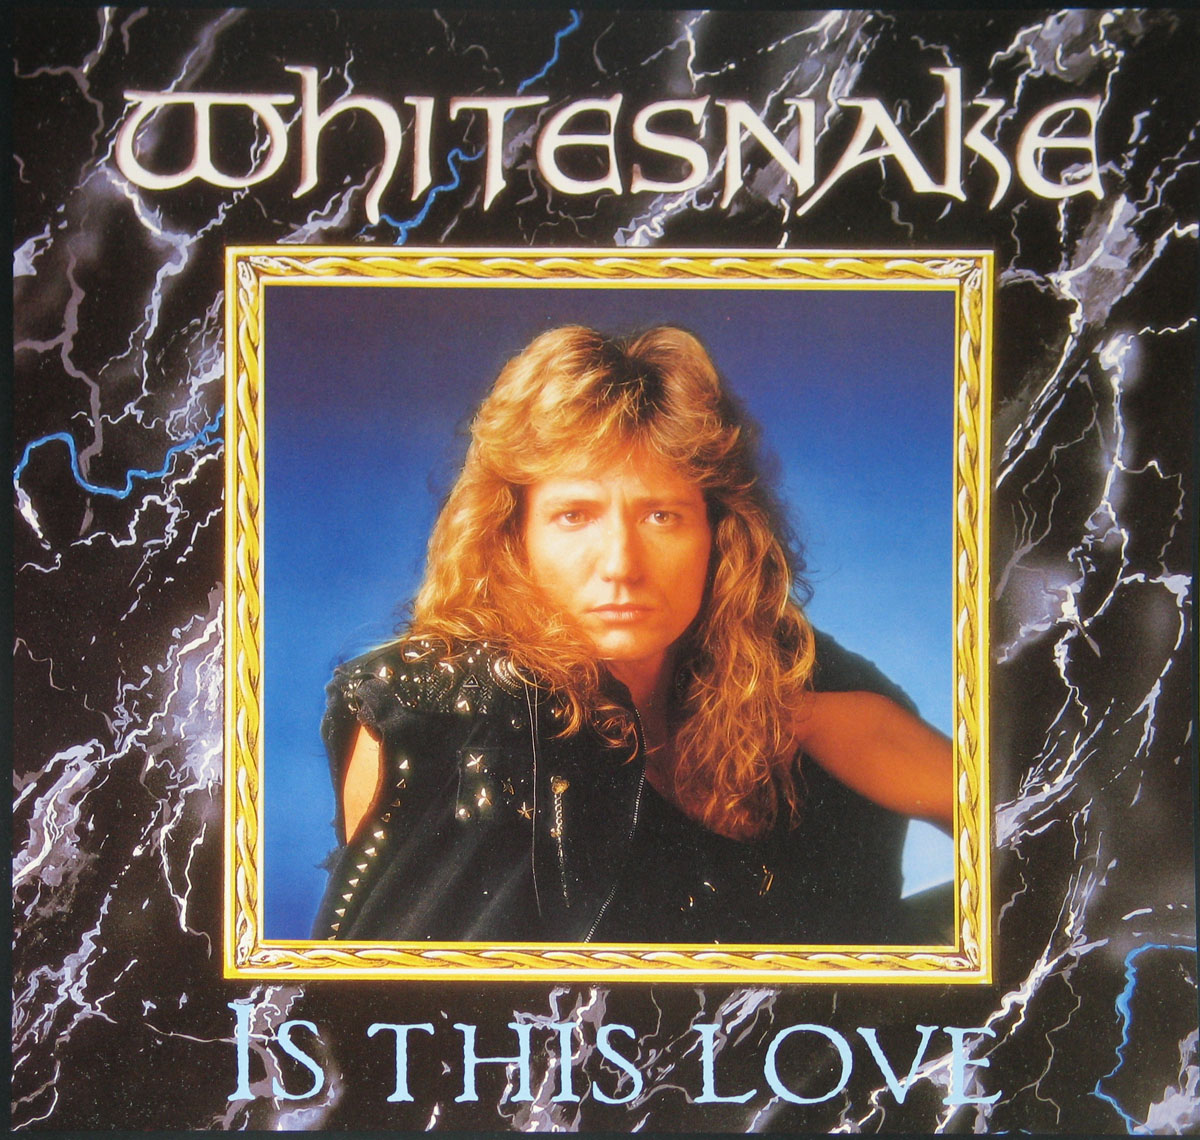 High Resolution Photos of whitesnake is this love maxi-single 